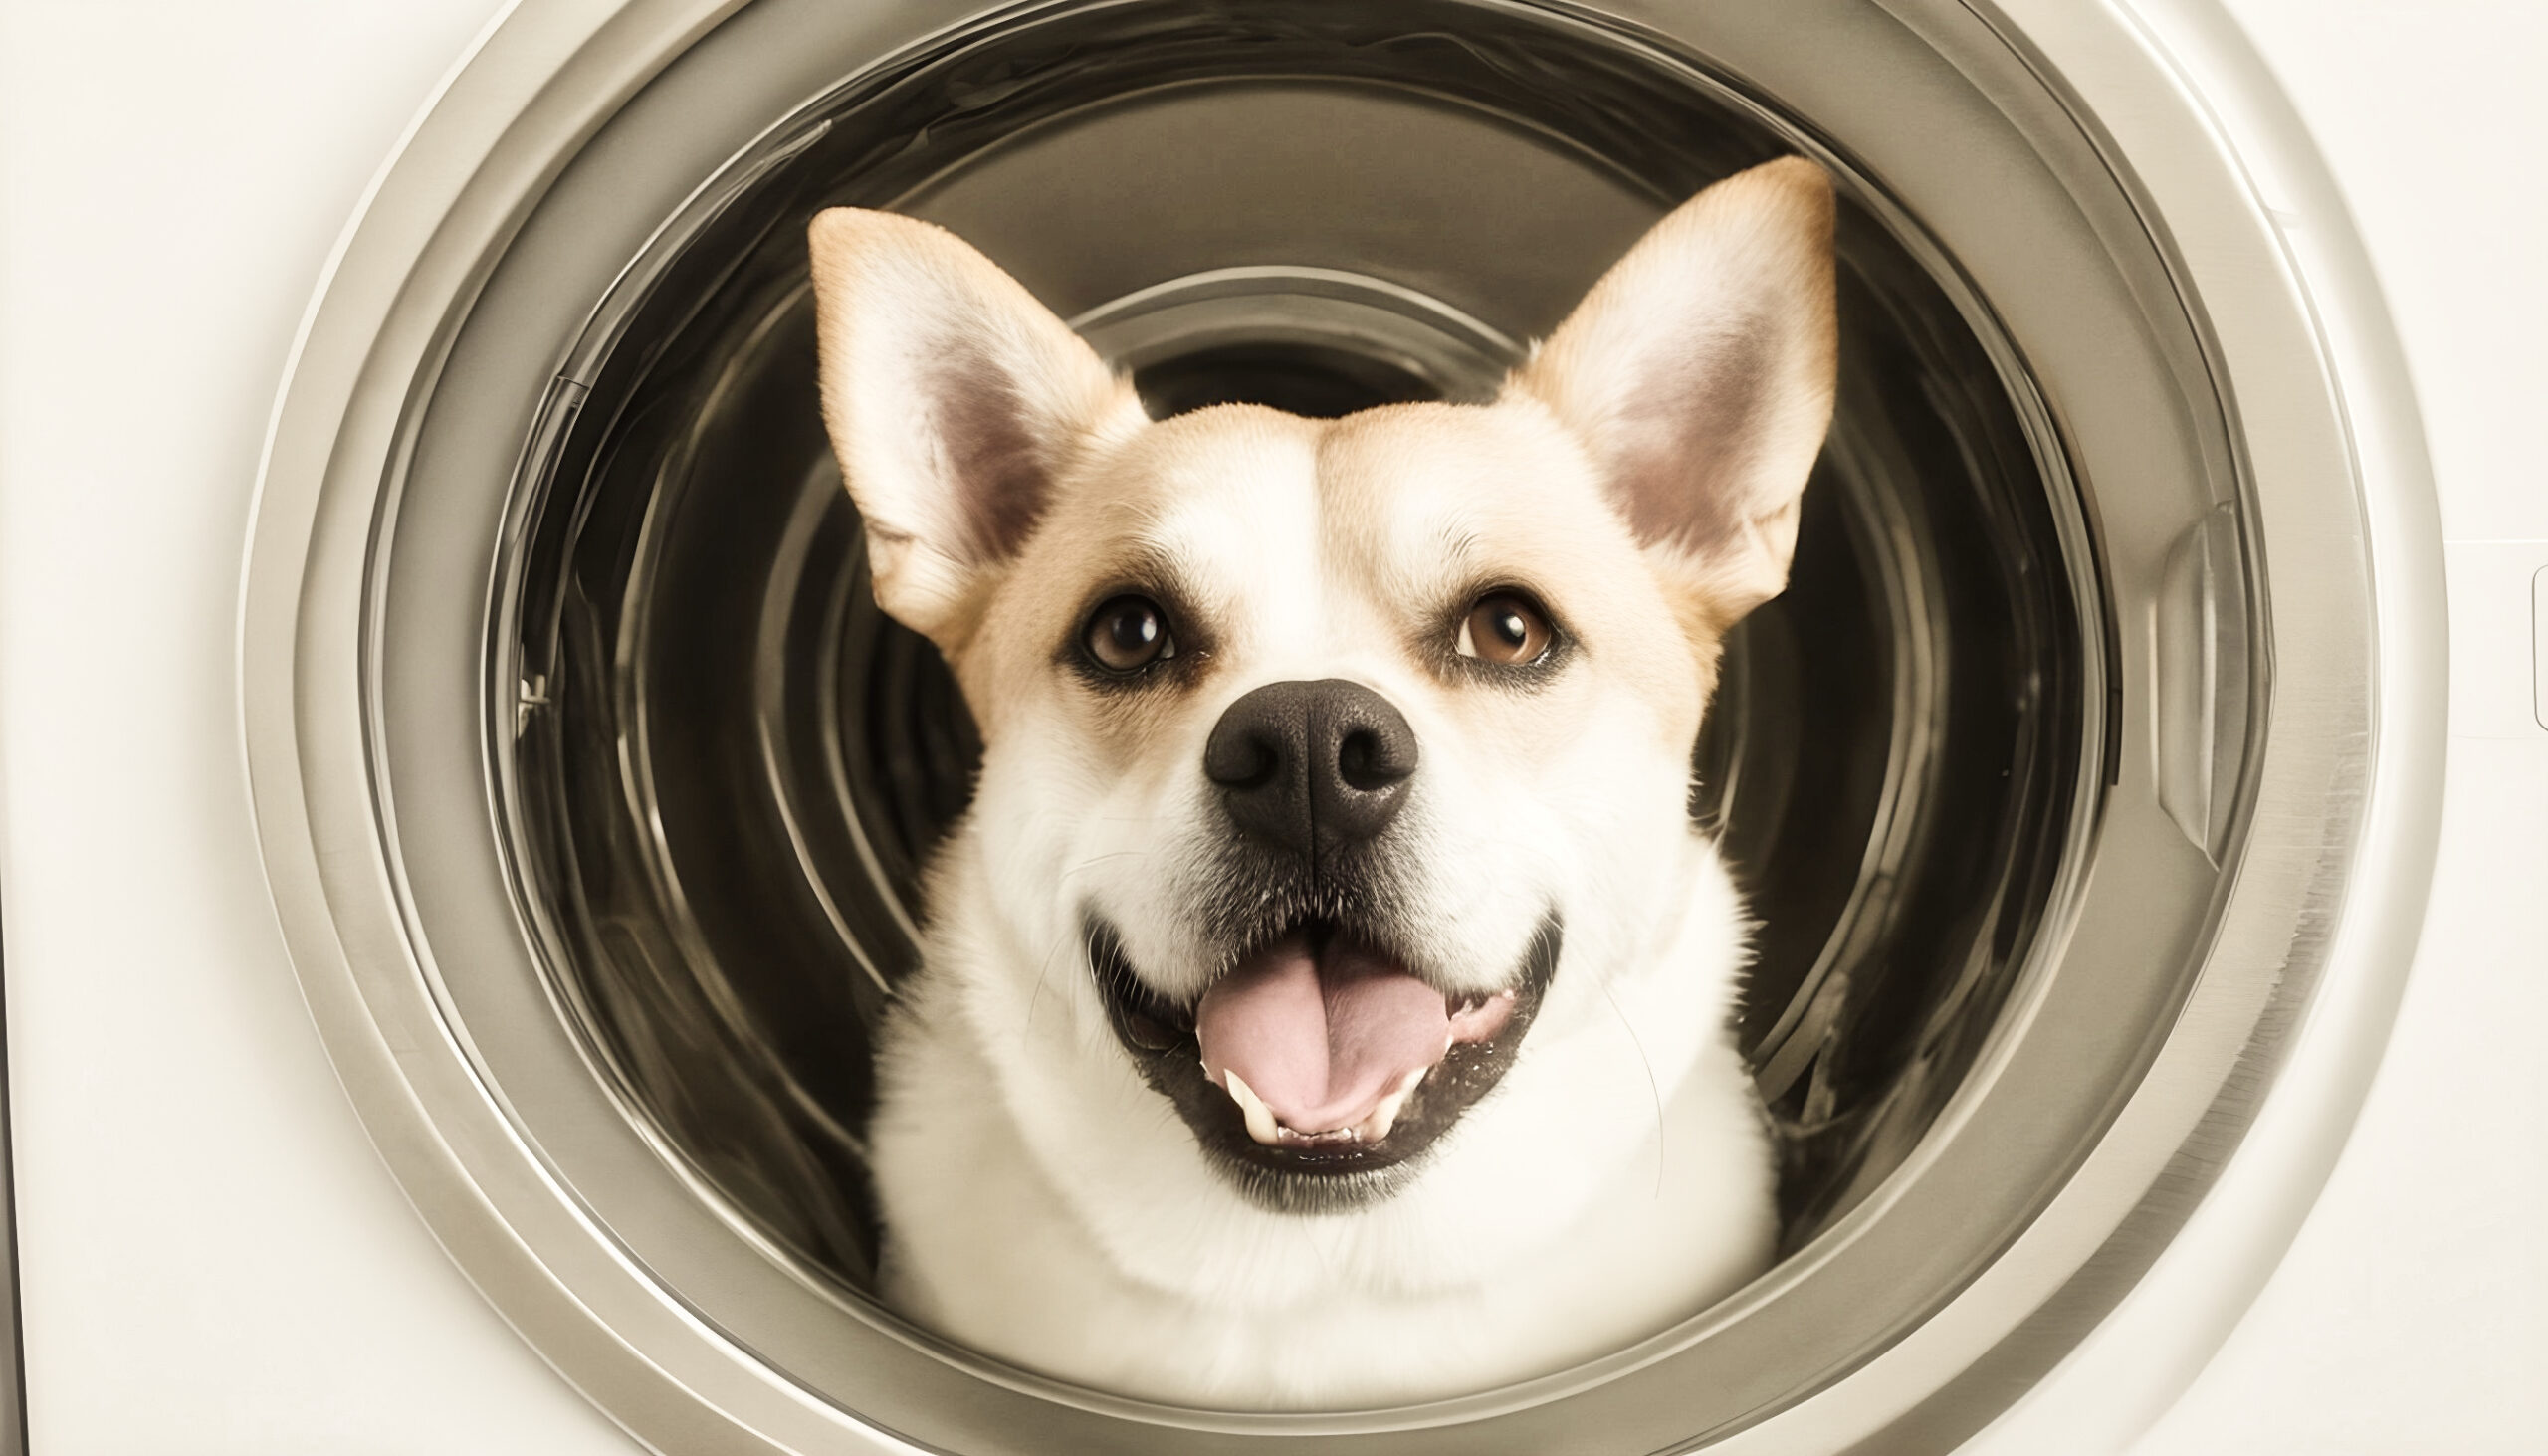 Top Rated Washer Dryer Maintenance and Repair Services in Hutto, TX